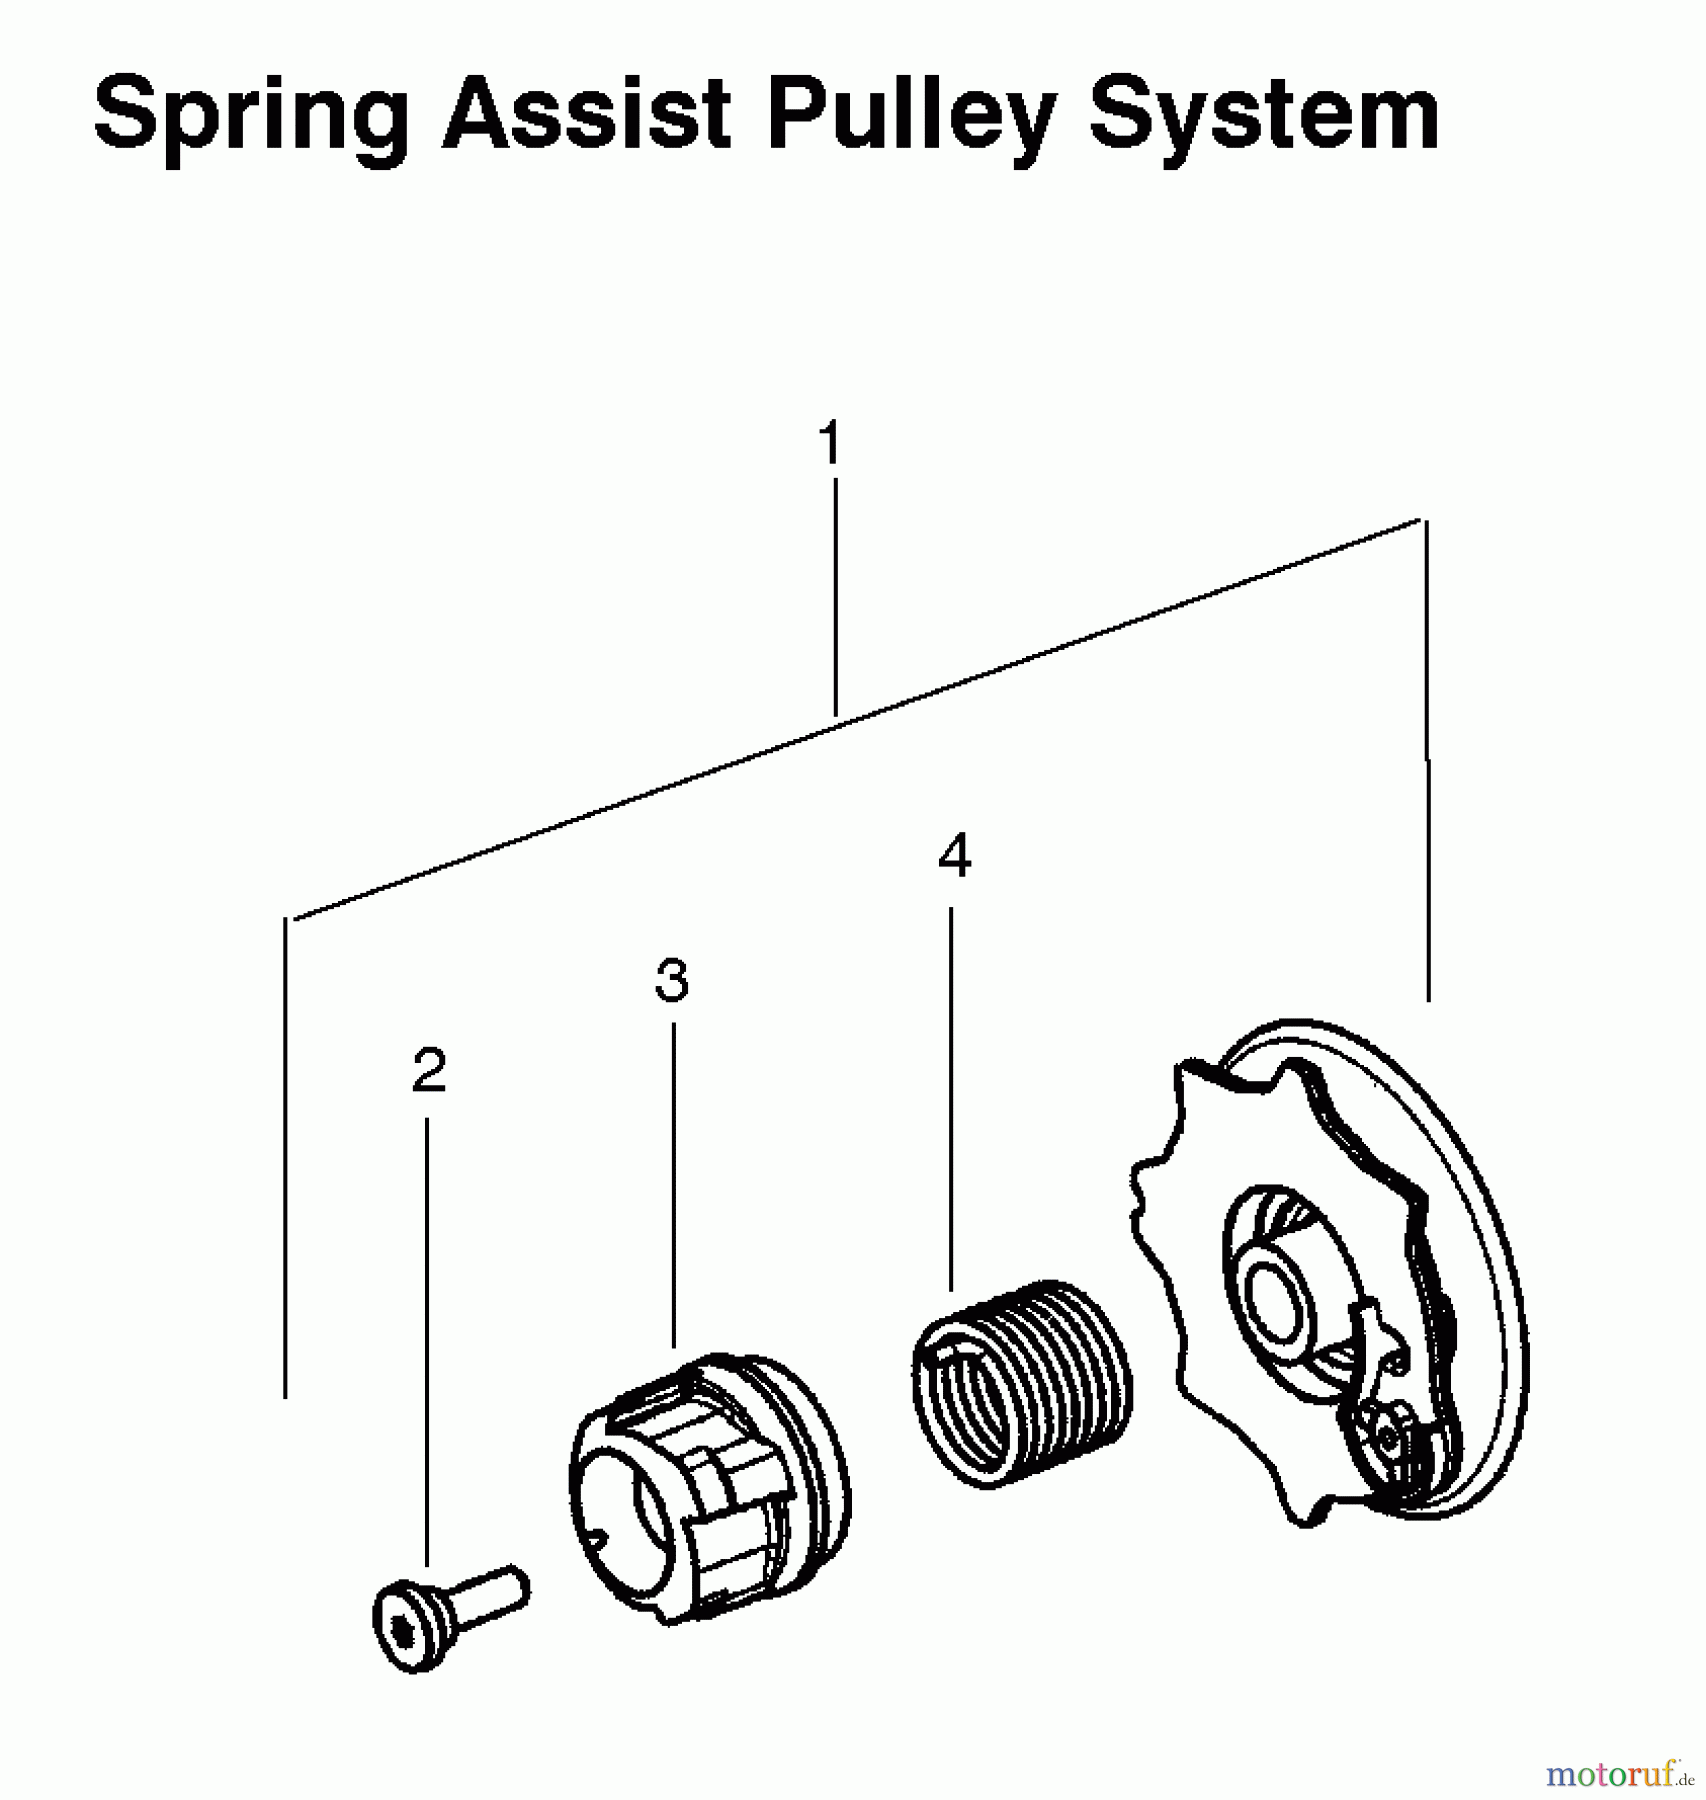  Poulan / Weed Eater Motorsägen P3314WS (Type 1) - Poulan Woodshark Chainsaw Spring Assist Pulley System